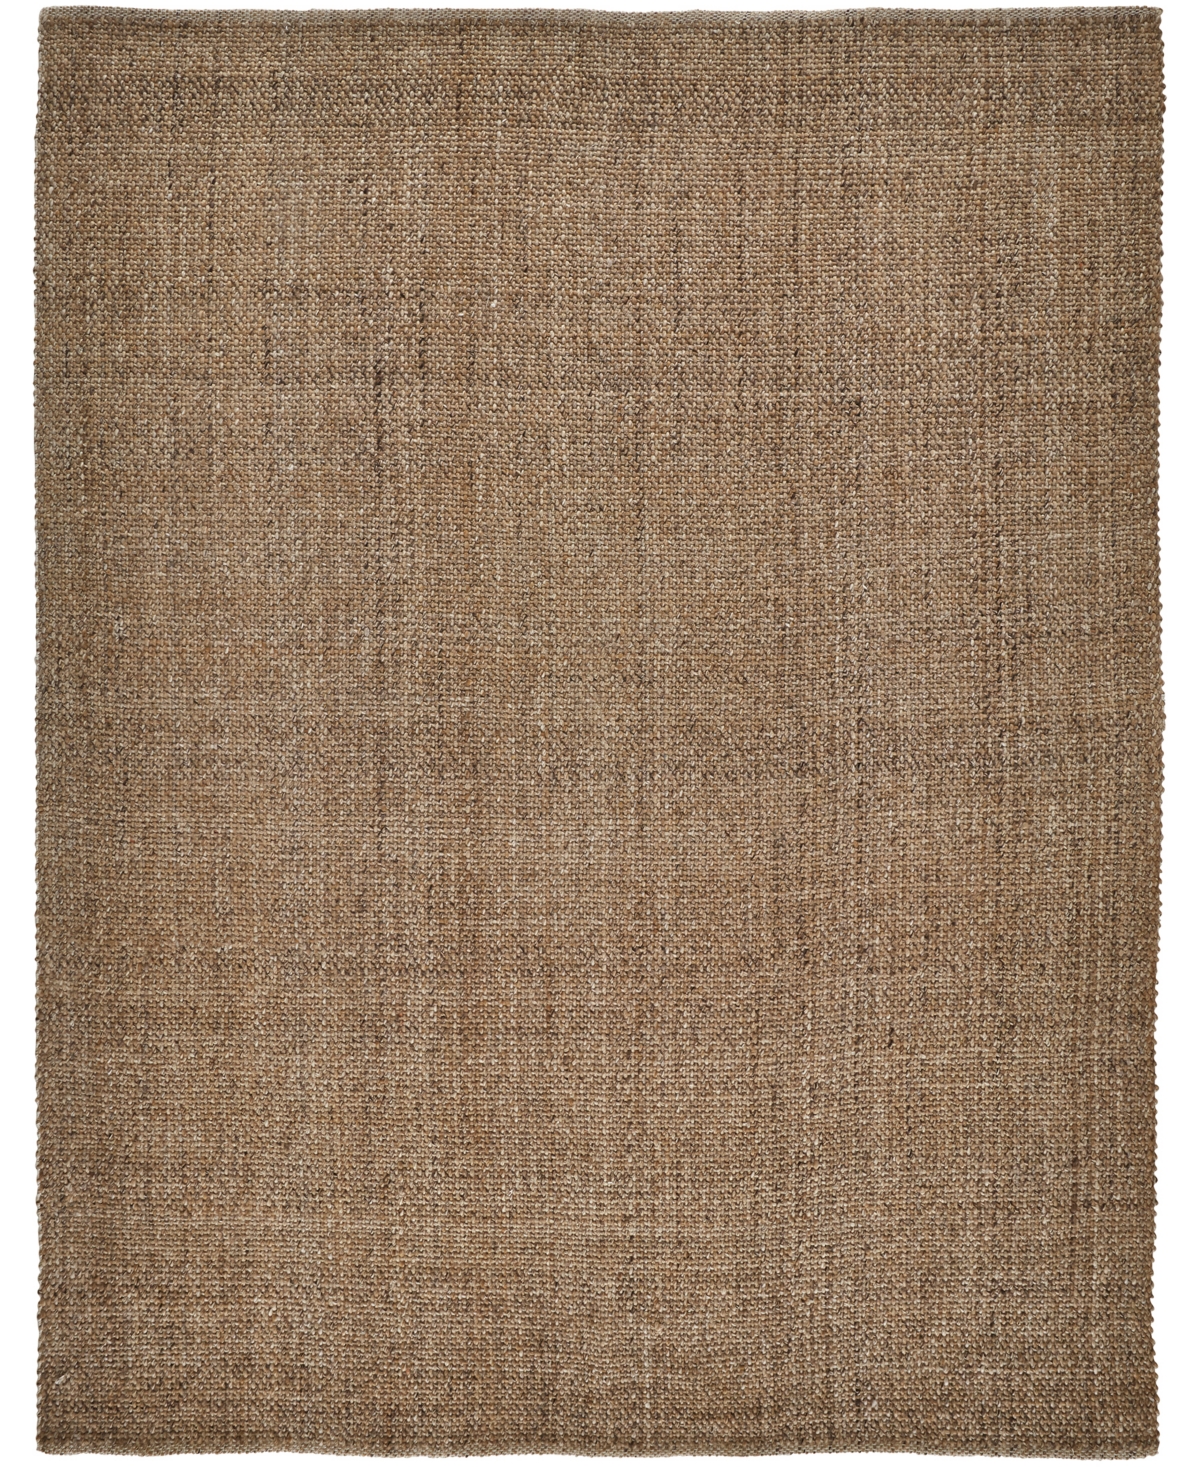 Simply Woven Naples R0751 5' X 8' Area Rug In Brown,tan